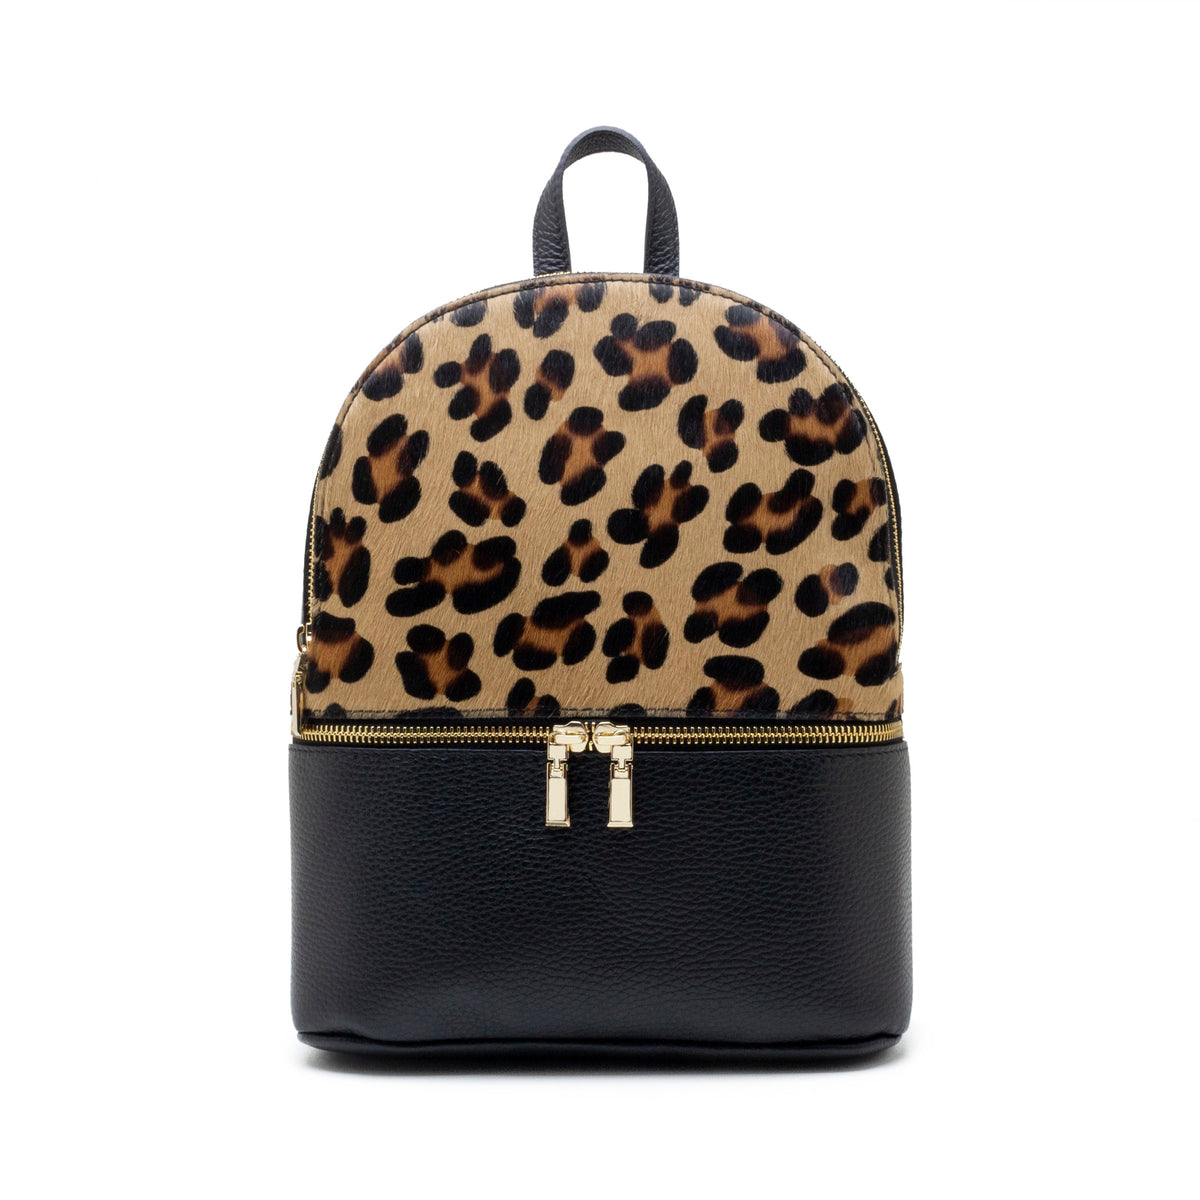 Amazon.com: Anneunique Leopard Print Diaper Bags Backpack with Name  Personalized Baby Bag Nursing Nappy Bag Travel Tote Bag Gifts for Mom Girl,  15x10.83x6.69 Inch (Pack of 1) : Baby